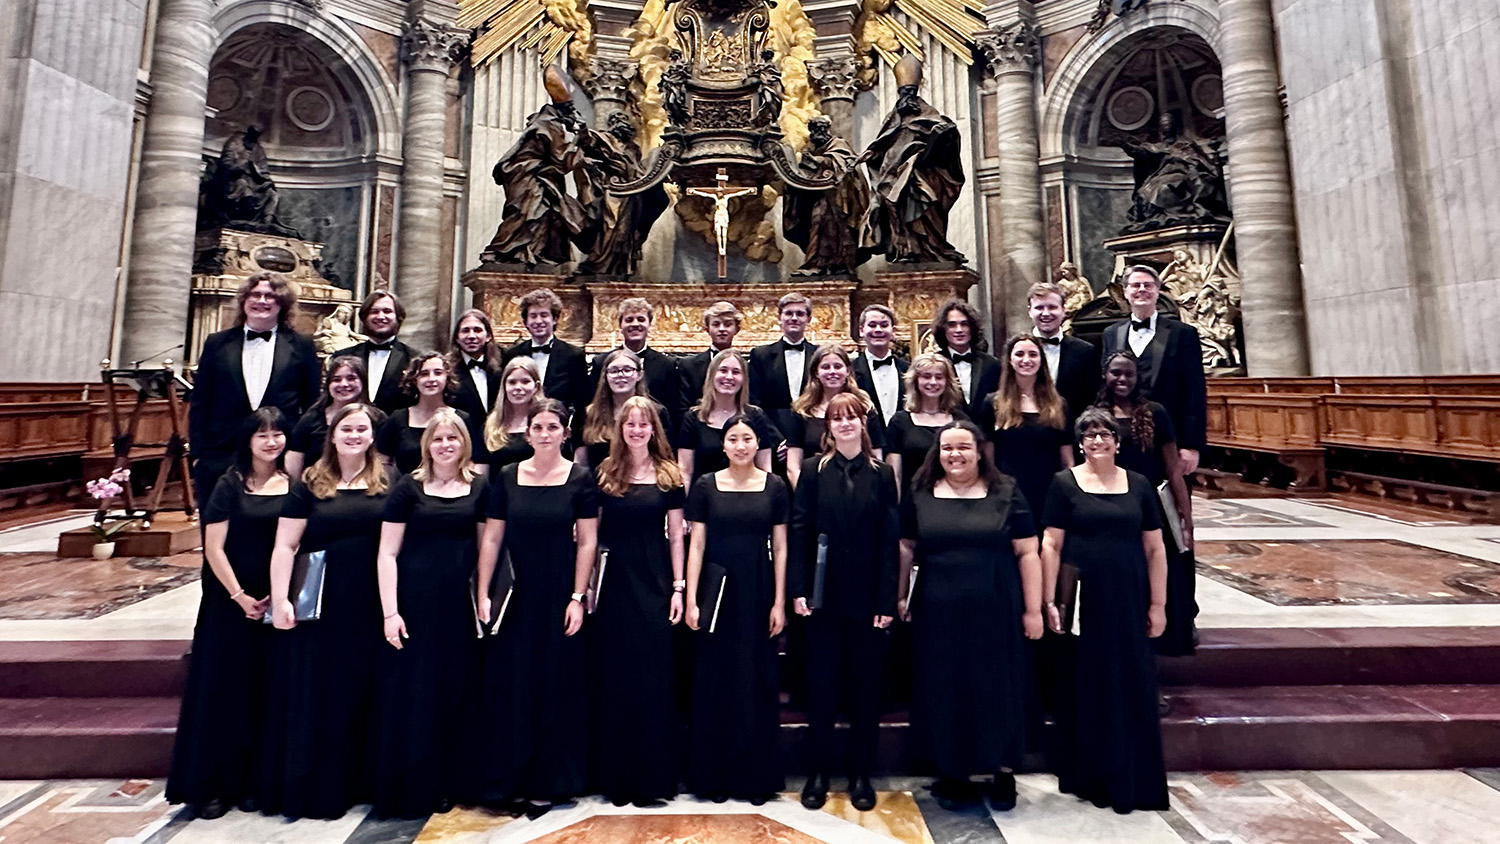 State Chorale in St. Peter’s Basilica at the Vatican after singing at Mass. Photo credit: Patrick Fargier